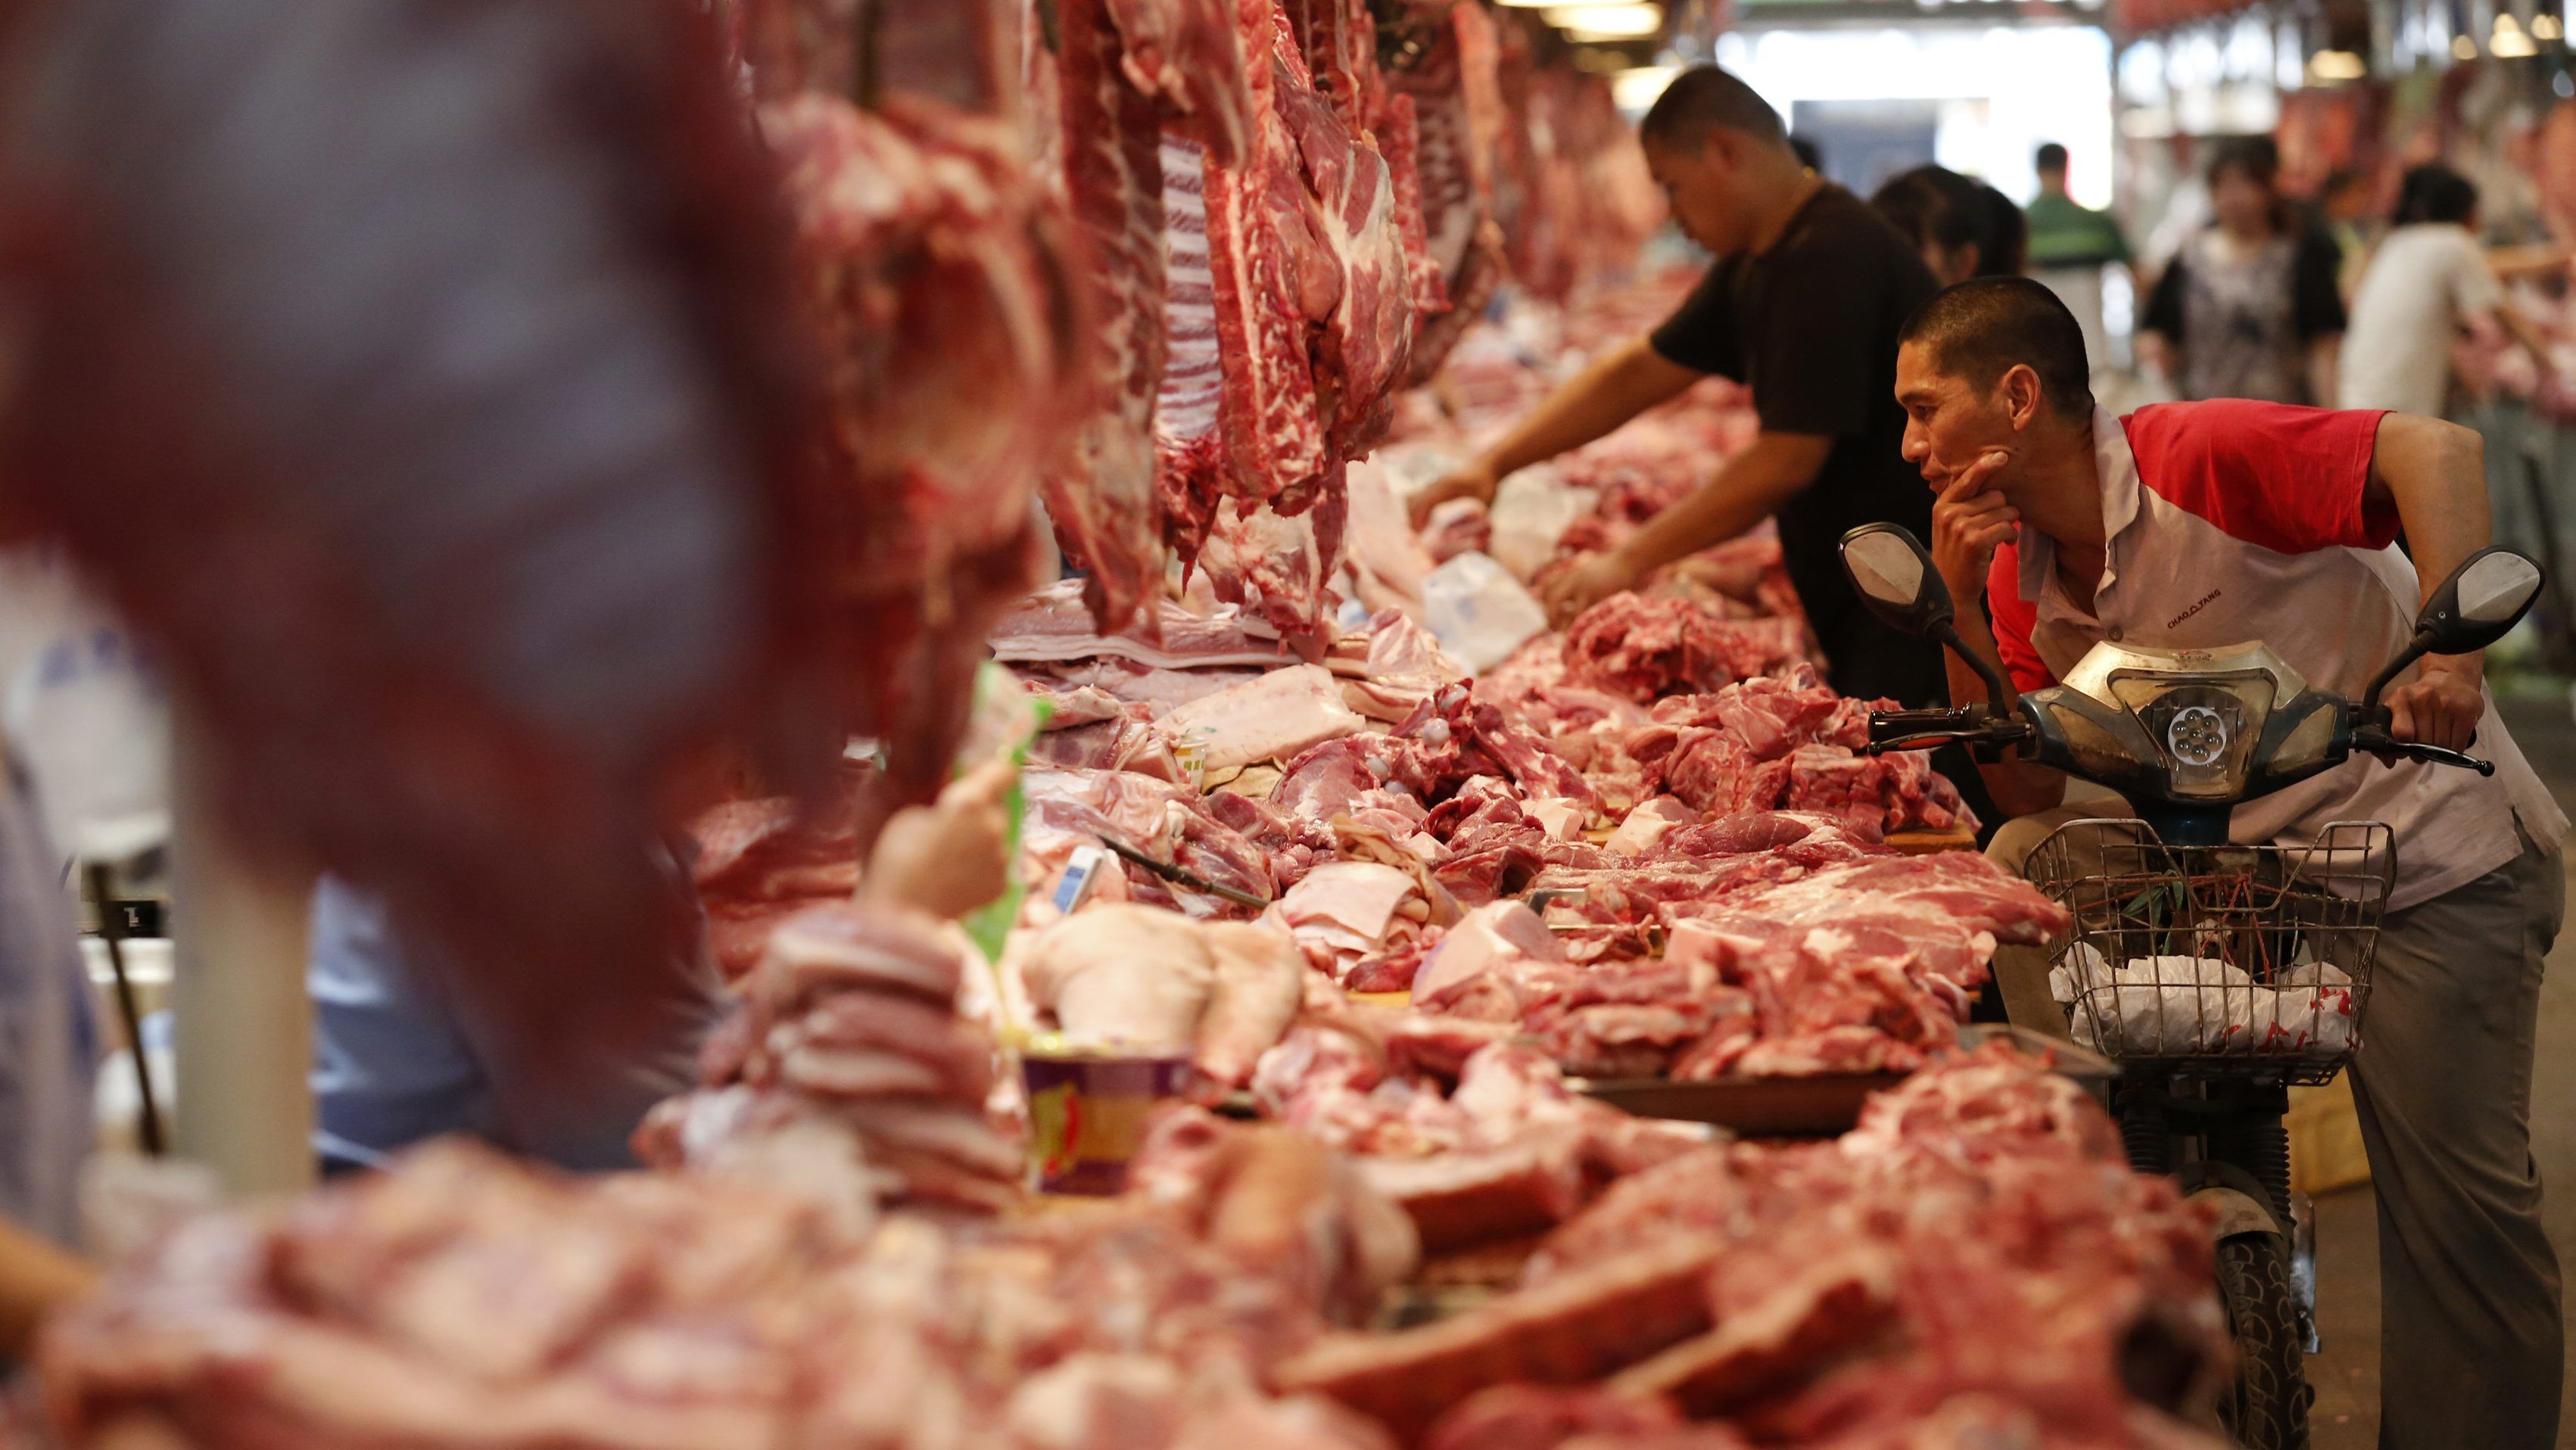 All cuts of Argentine beef and lamb have full access to the Chinese market — MercoPress3403 x 1916